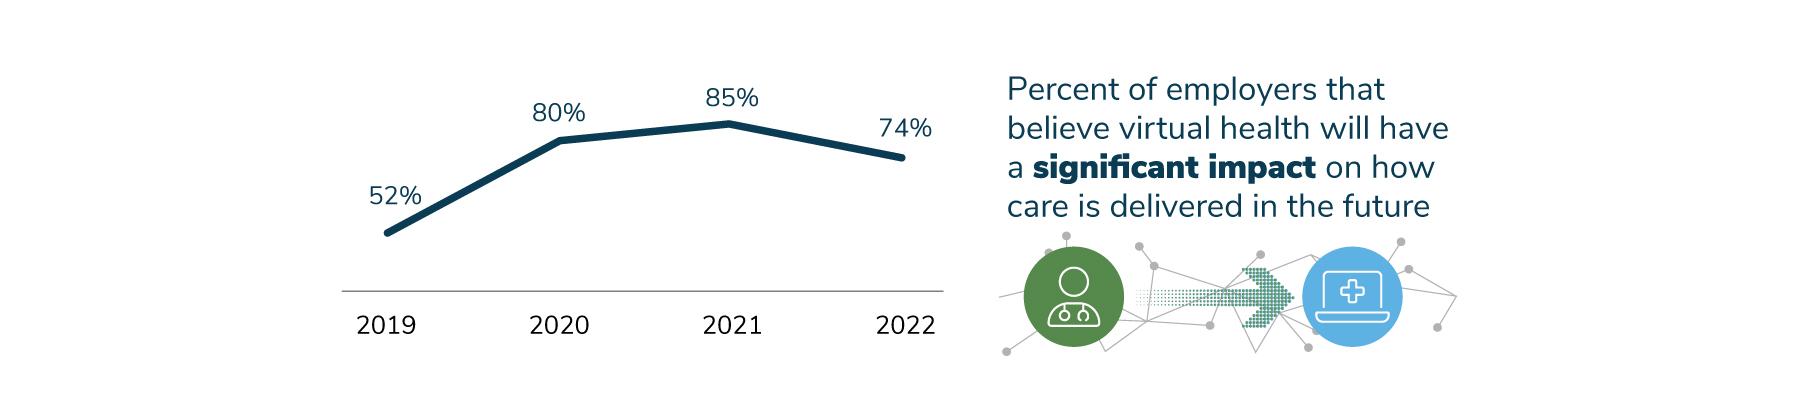 74% of employers believe that virtual health will have a significant impact on care delivery in 2022- down from 85% last year, but up from 52% in 2019.